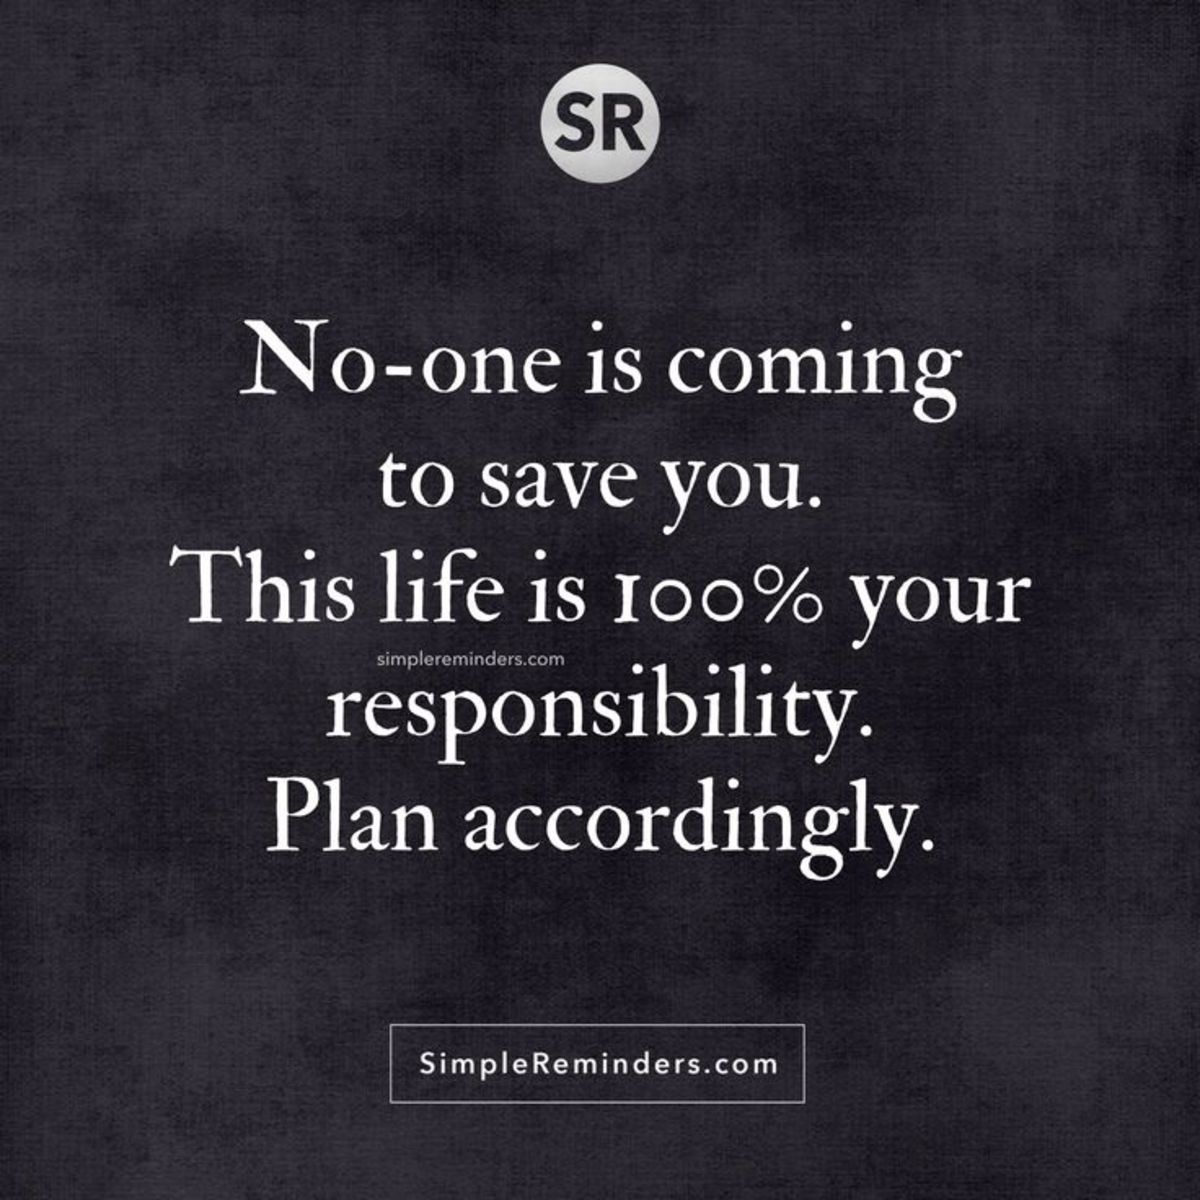 nobodys-coming-to-save-you-your-life-is-one-hundred-percent-your-responsibility